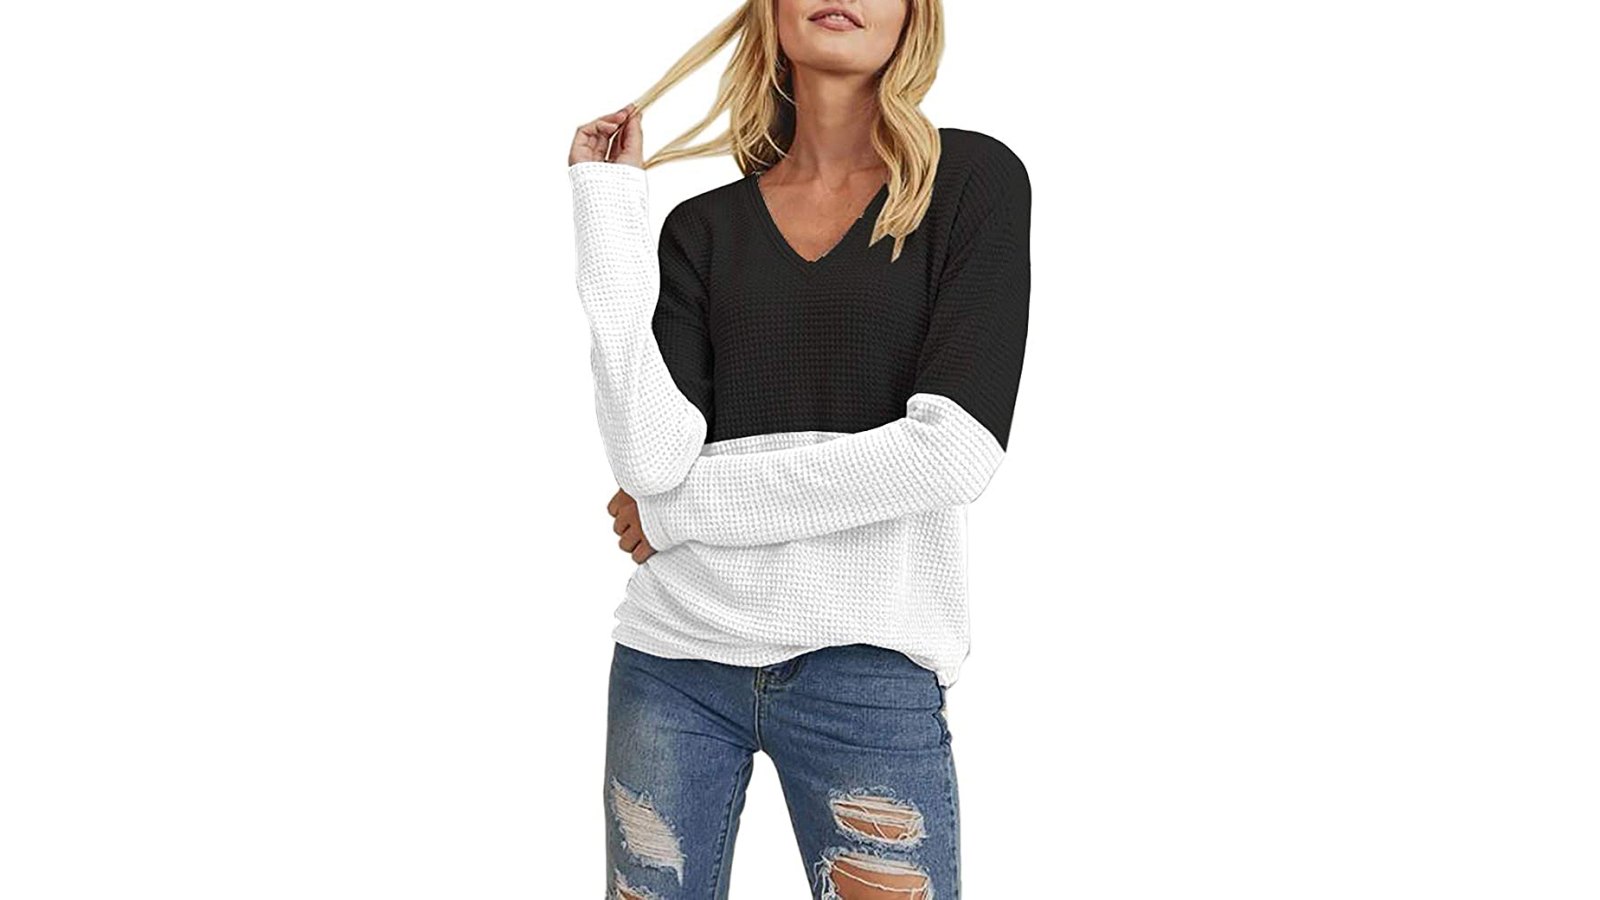 Dellytop Long-Sleeve Thermal Waffle Knit Top